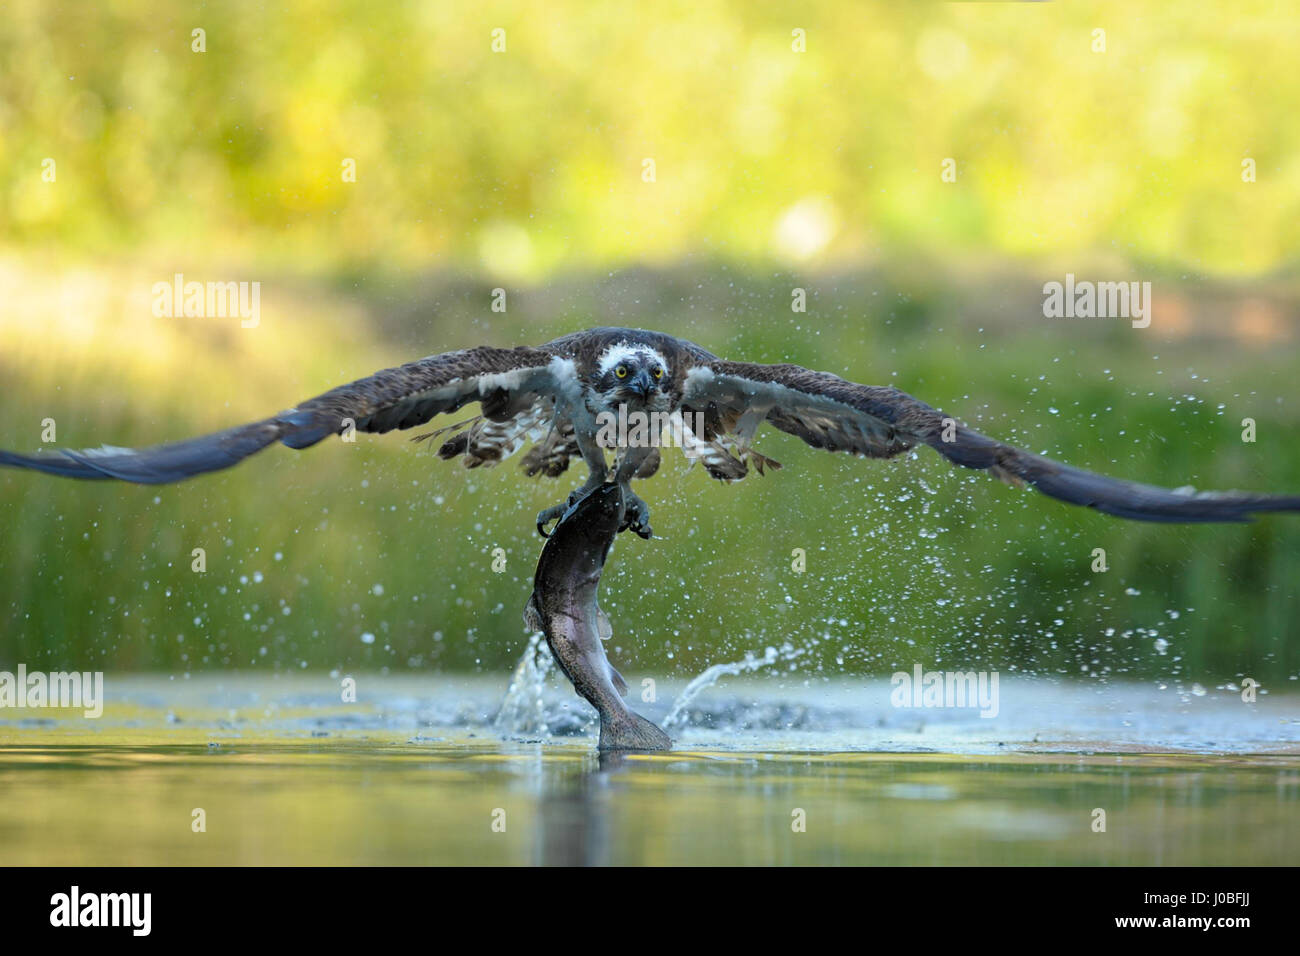 STUNNING pictures have captured an Osprey with a five-foot wingspan displaying astonishing speed and skill to pluck an unlucky fish out of the water. The spectacular sequence shows the two-foot-long bird of prey swoop into the water and grab the unfortunate fish with its talons before flying off again. The fishing Osprey looked directly at the camera as it flies off to enjoy the catch of the day. The incredible images were taken in Finland by Environmental Group Manager and amateur photographer Vladimir Kogan (44) from Or Agiva, Israel. Stock Photo